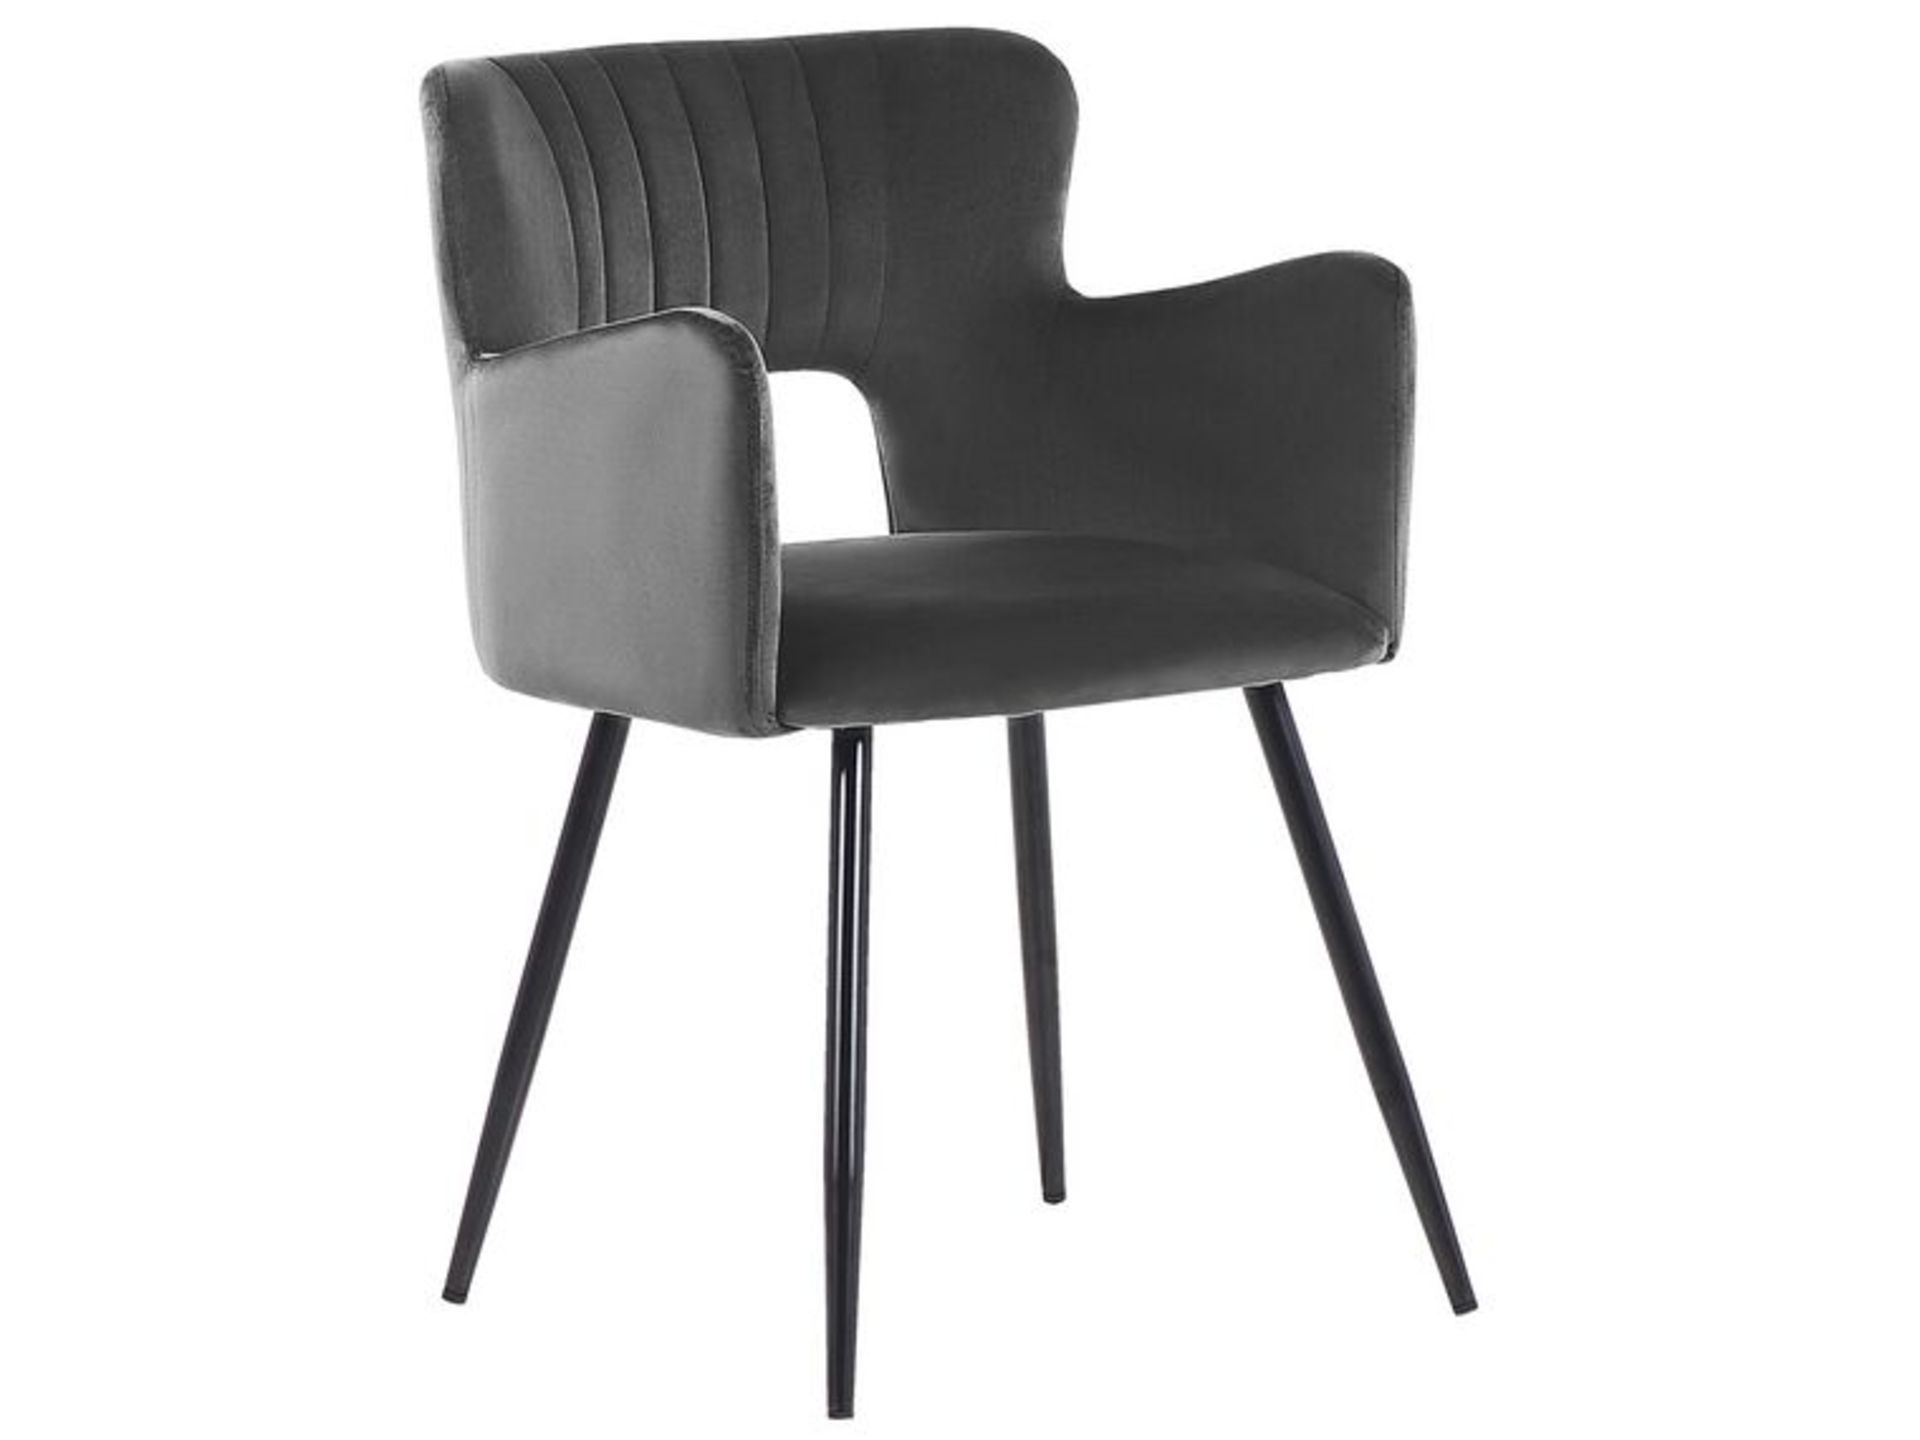 Sanlic Velvet Dining Chair. - SR6. RRP £149.99. This chair is all about modern design, it presents a